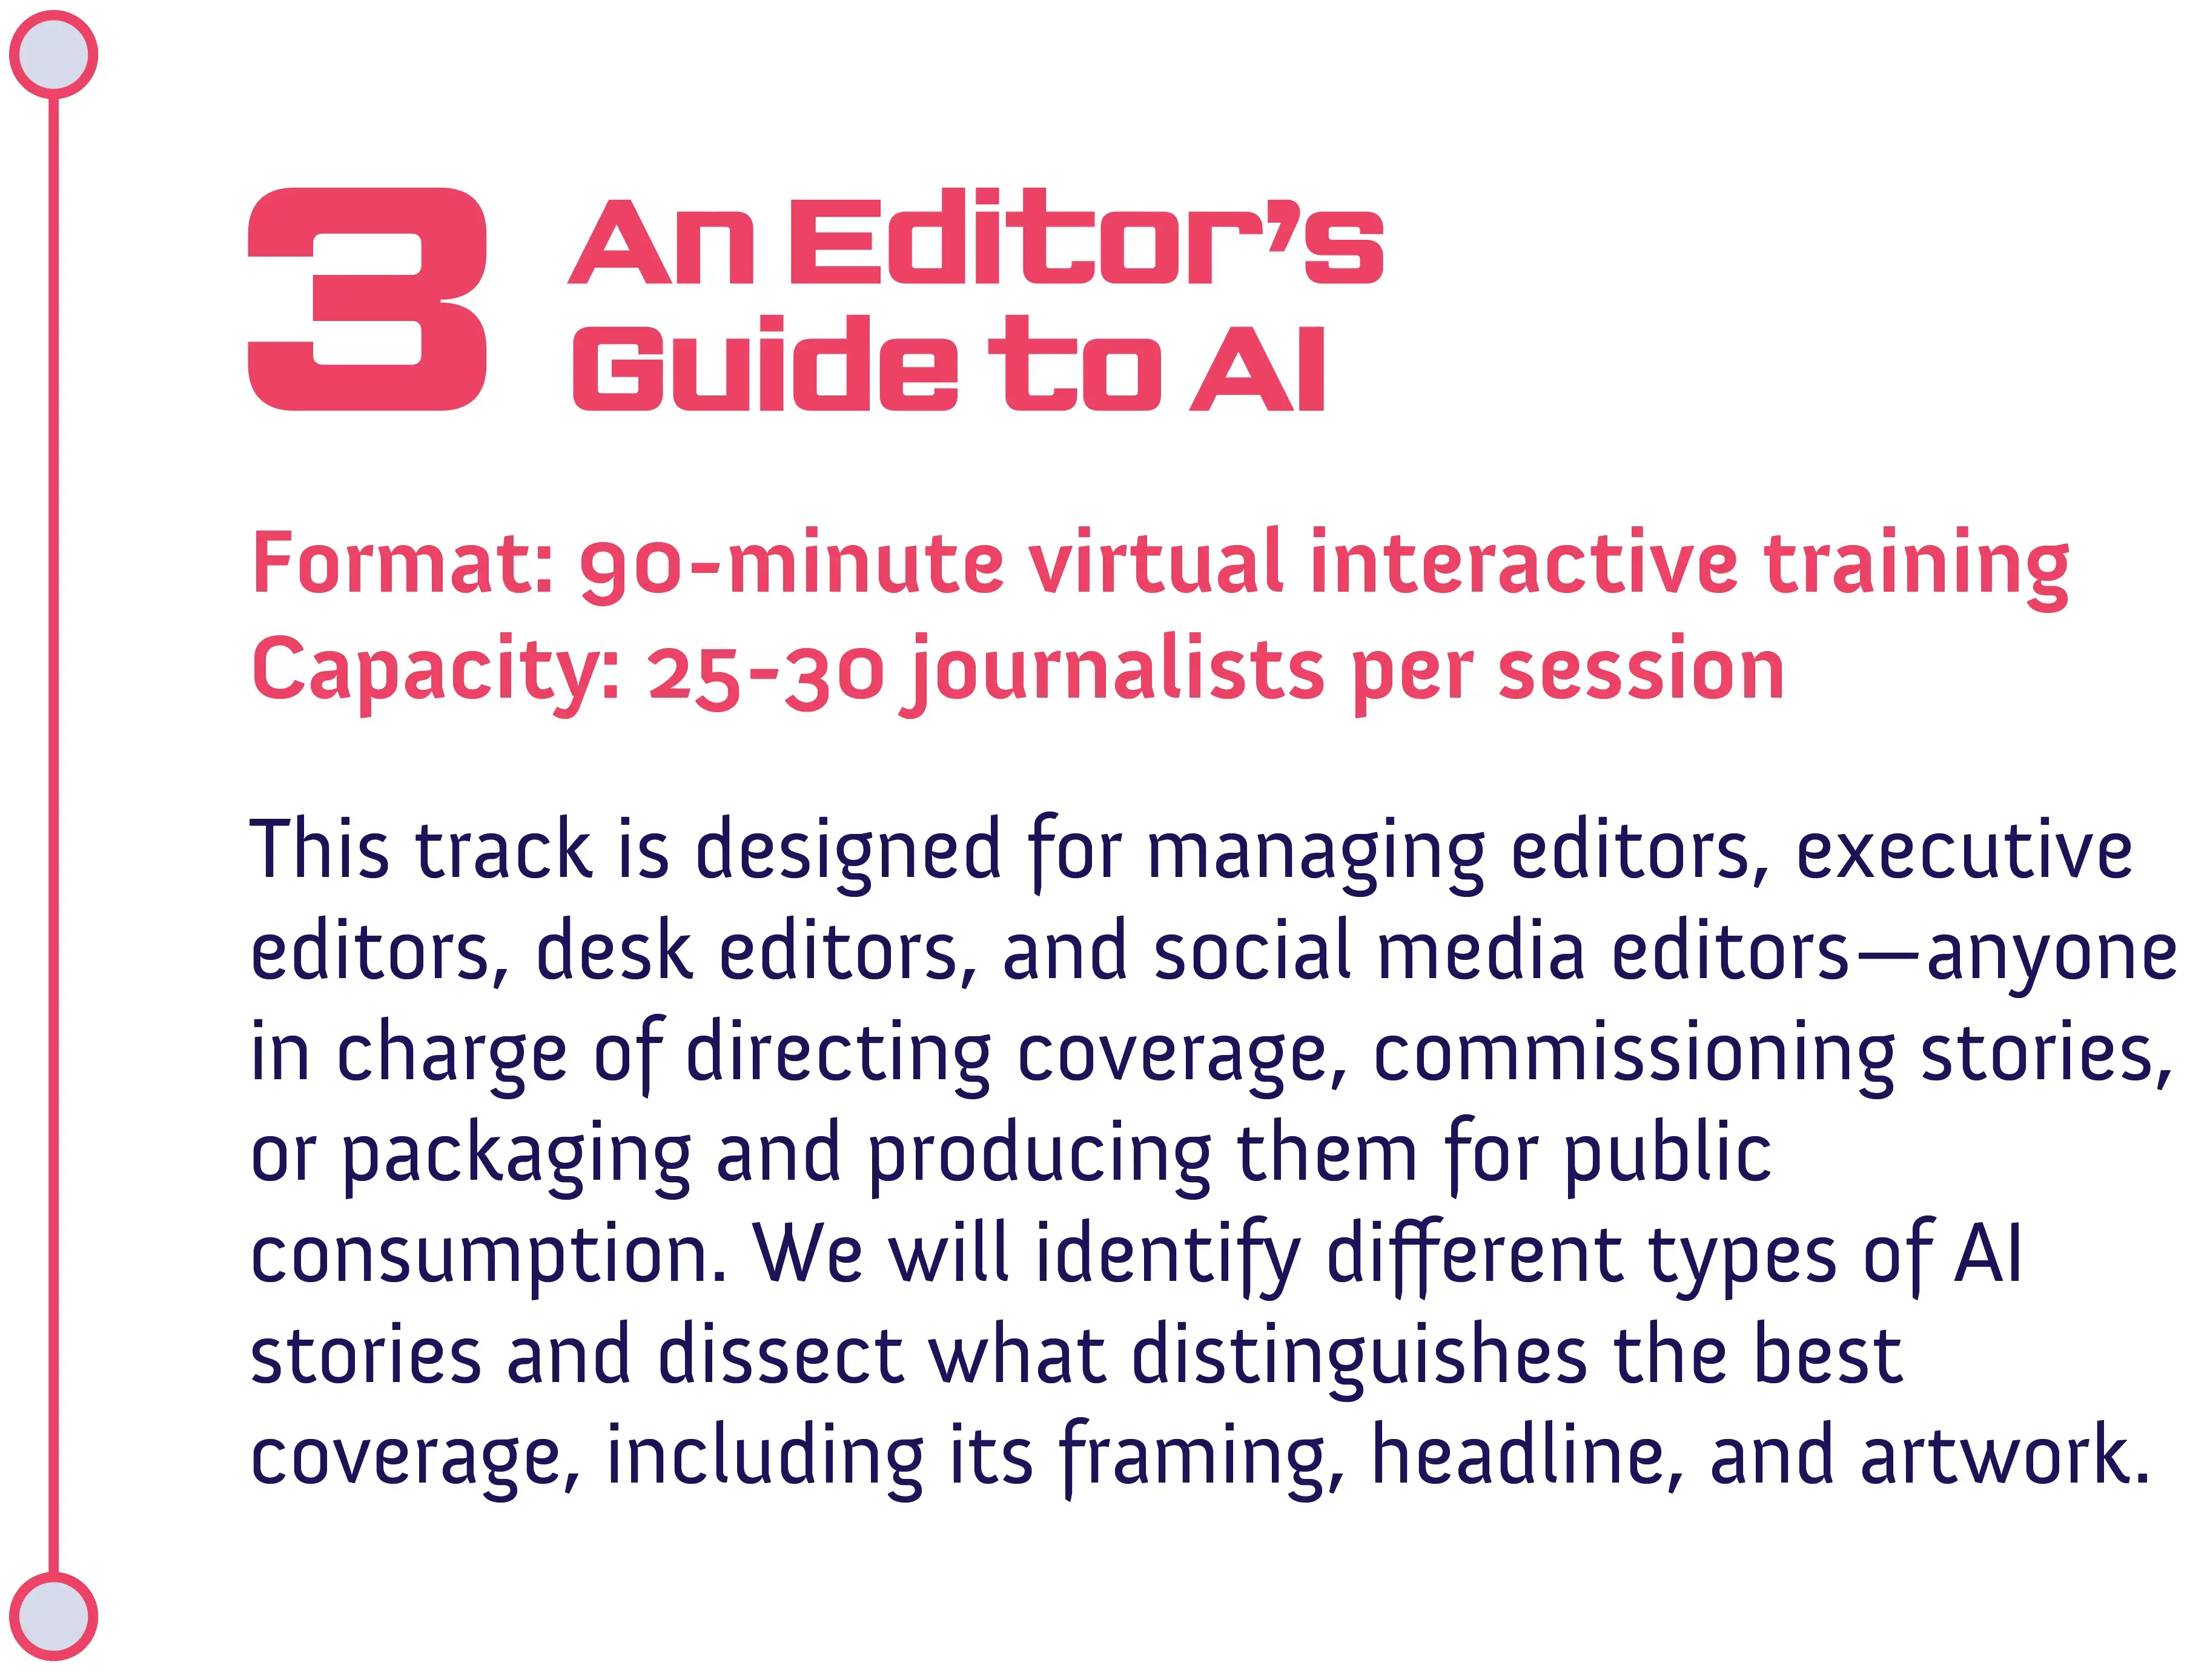 Track #3: An Editor's Guide to AI<br />
Format: 90-minute virtual interactive training<br />
Capacity: 25-30 journalists per session</p>
<p>This track is designed for managing editors, executive editors, desk editors, and social media editors—anyone in charge of directing coverage, commissioning stories, or packaging and producing them for public consumption. We will identify different types of AI stories and dissect what distinguishes the best coverage, including its framing, headline, and artwork.